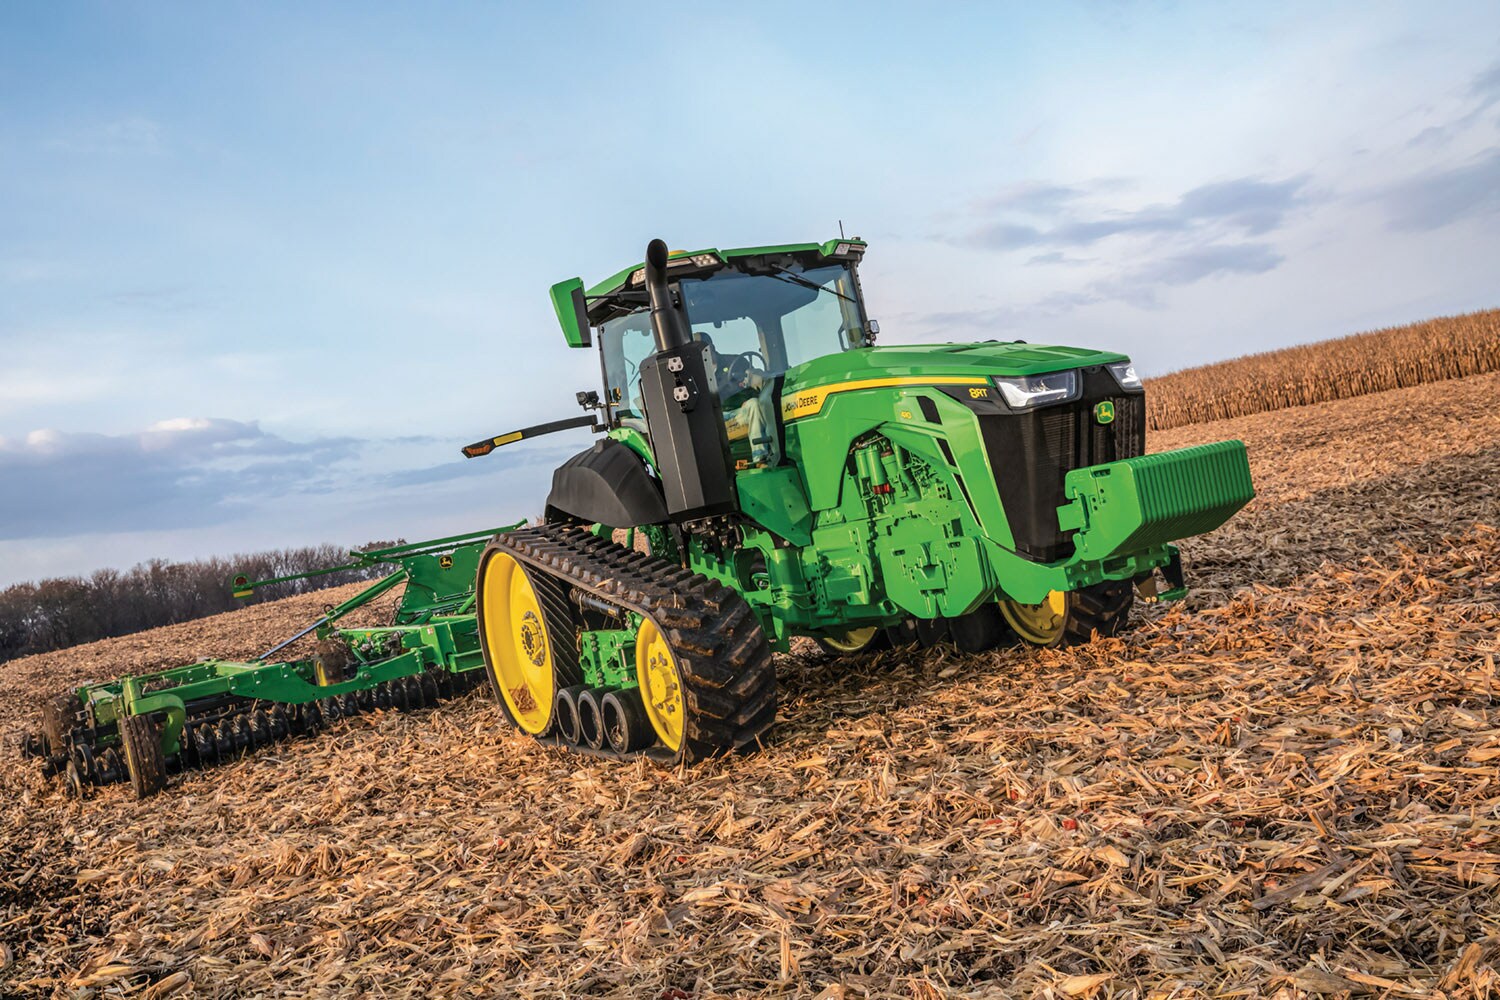 John Deere 8RT Tractors are the only two-track tractor available with an AirCushion suspension system.